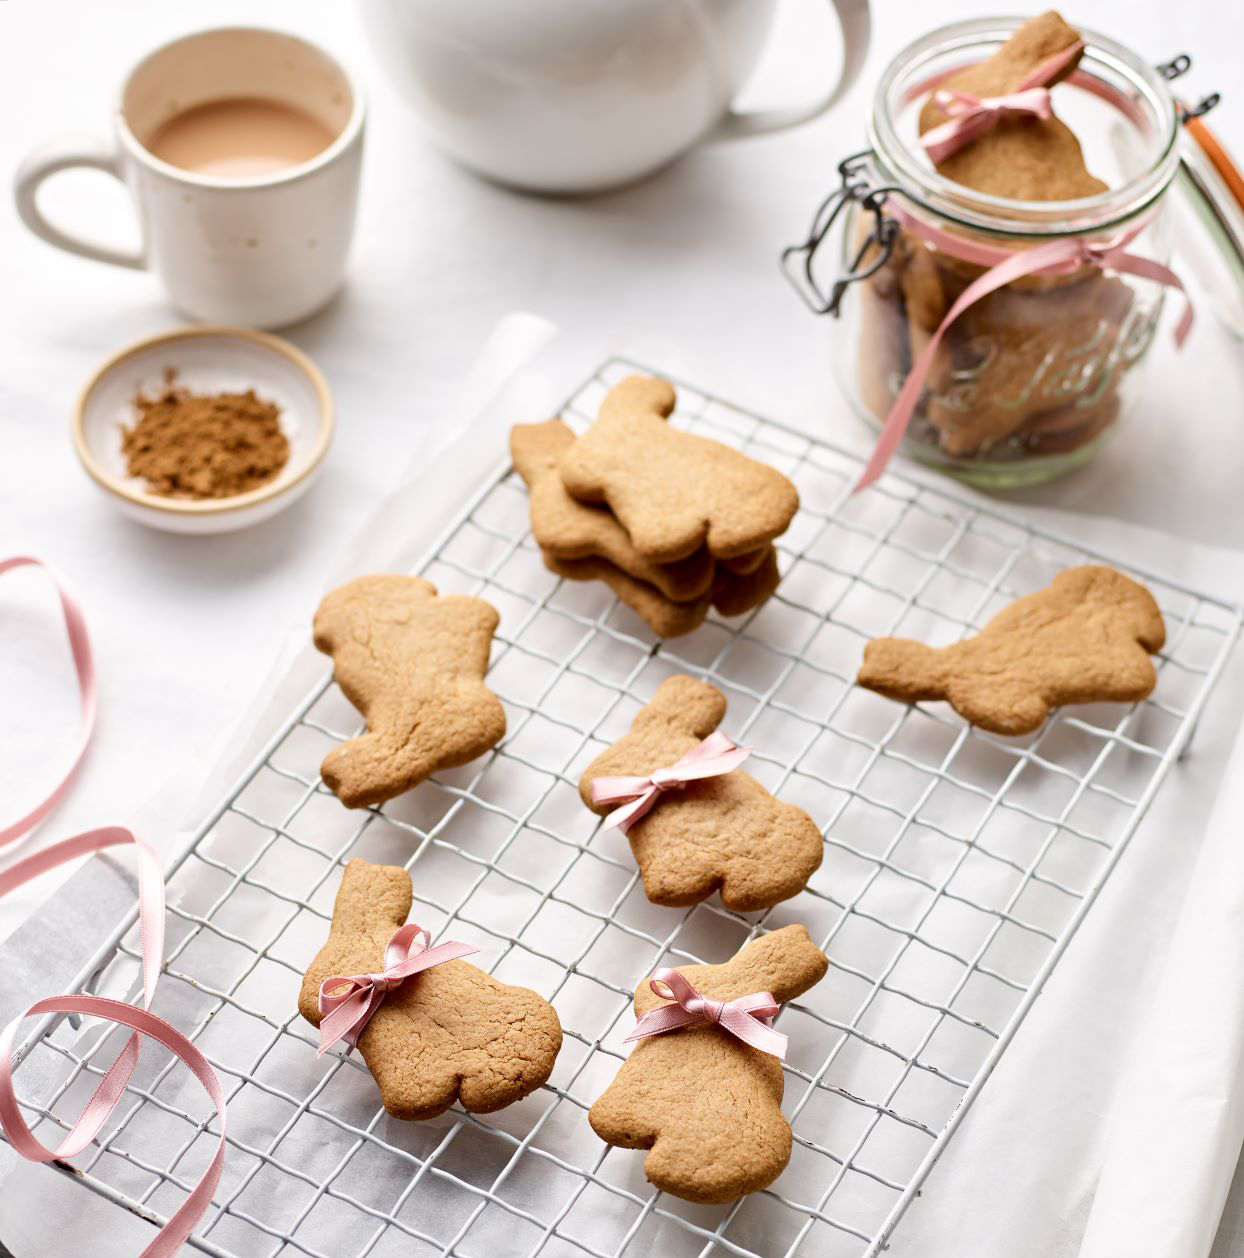 Gluten-free Easter bunny biscuits